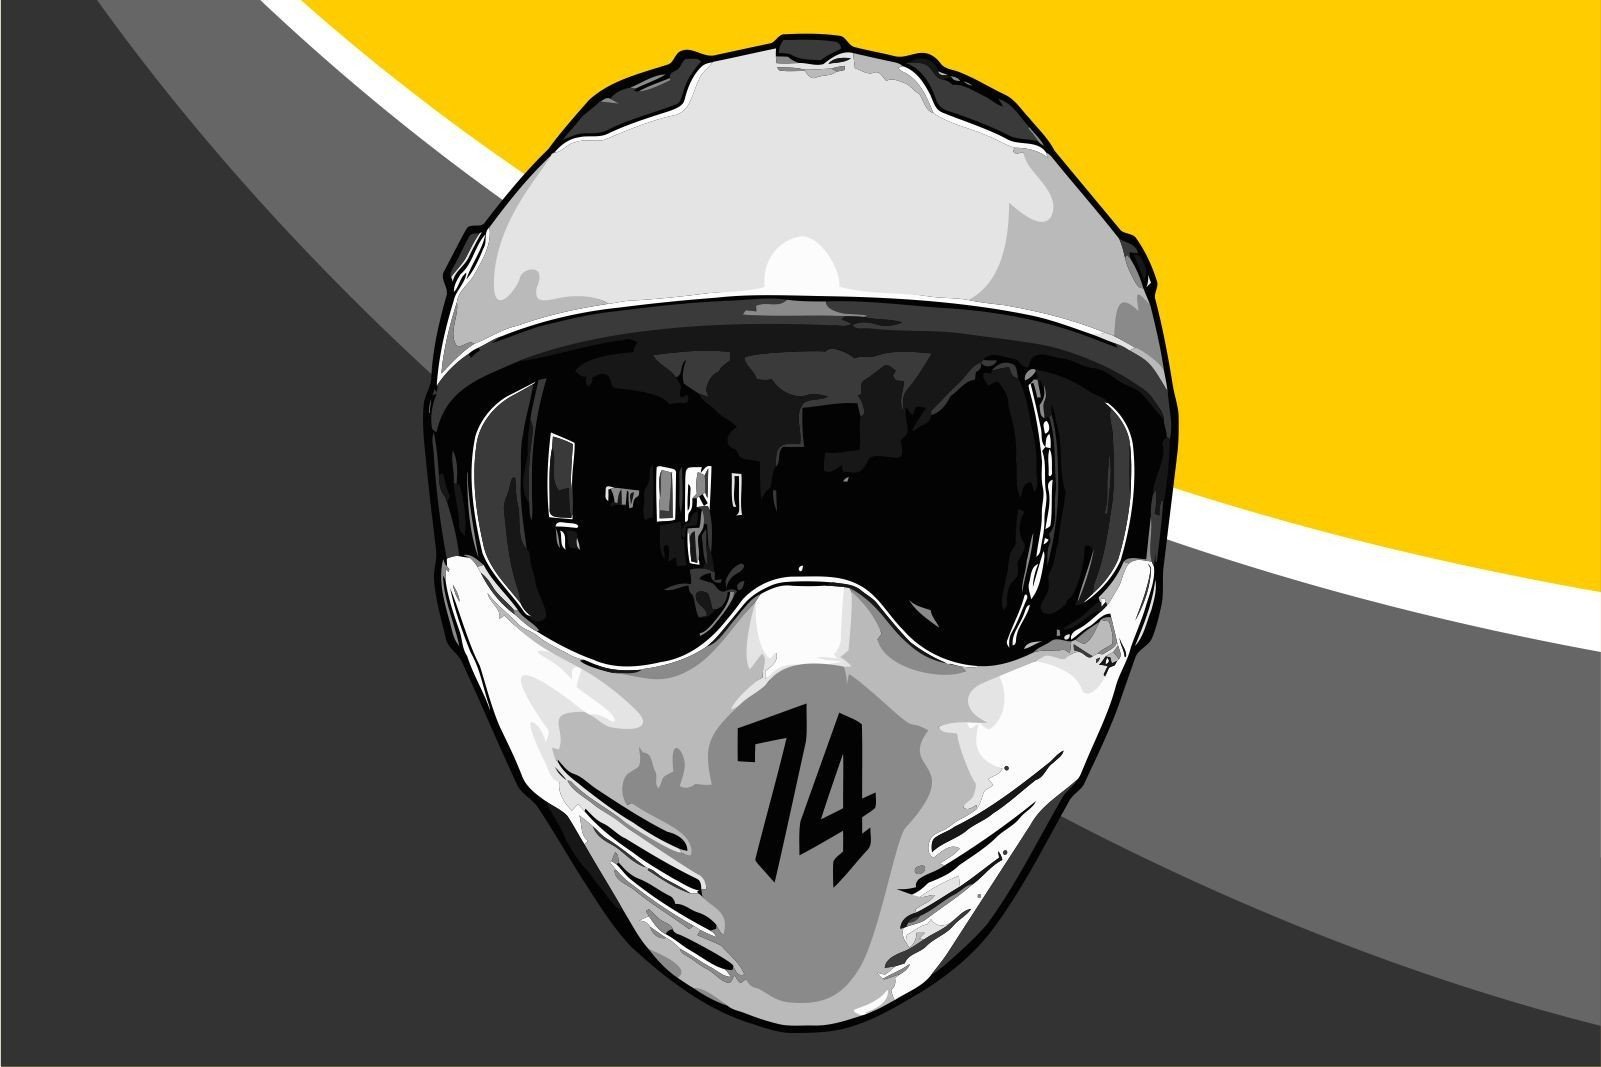 Helmet Front View Graphic by jellybox999 · Creative Fabrica